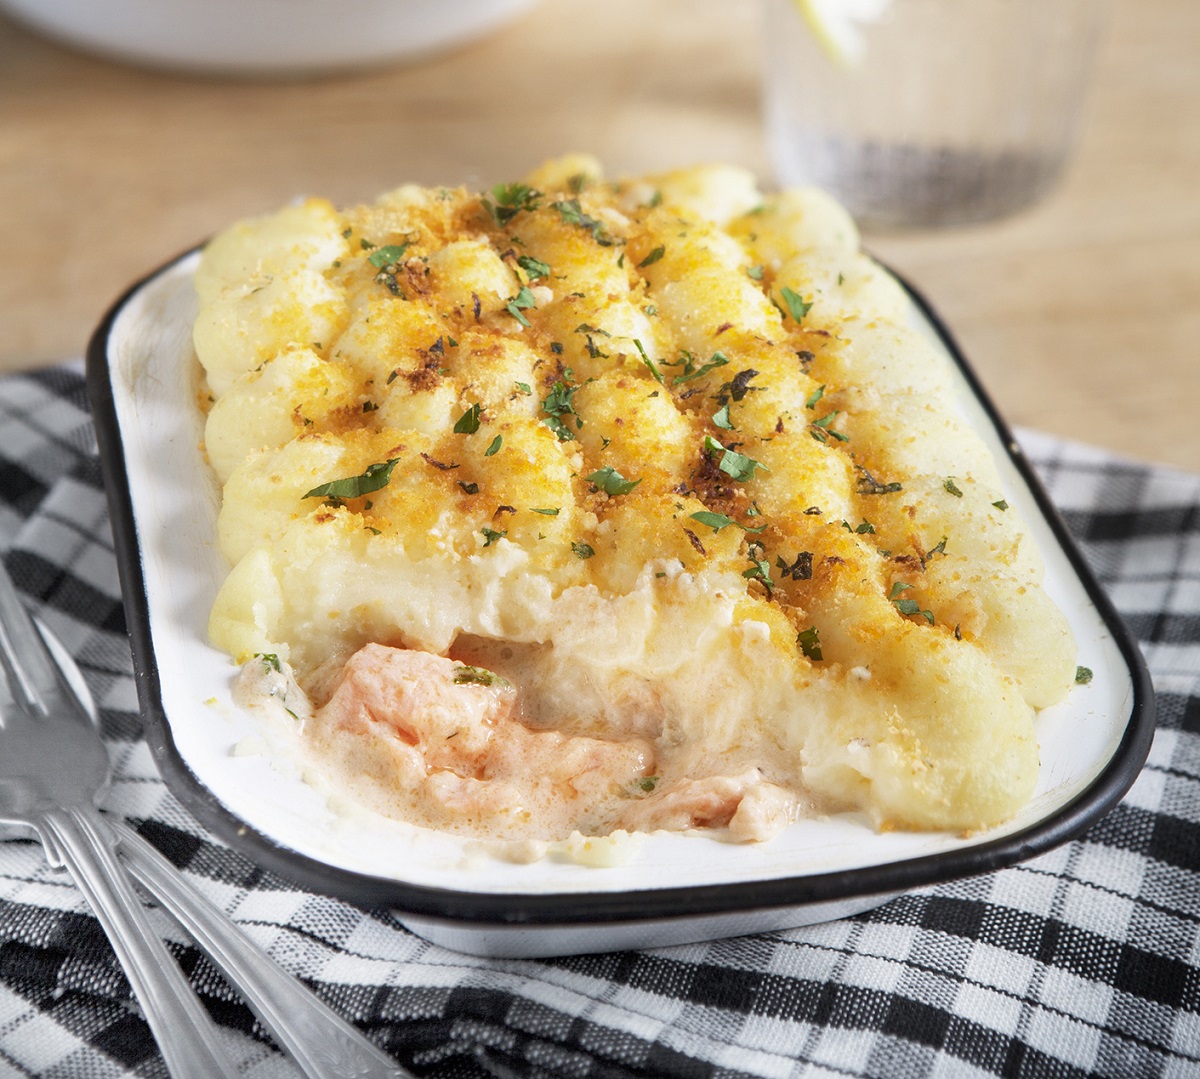 Trawling For A Recipe? Try This Fantastic Fish Pie! - The People's Friend